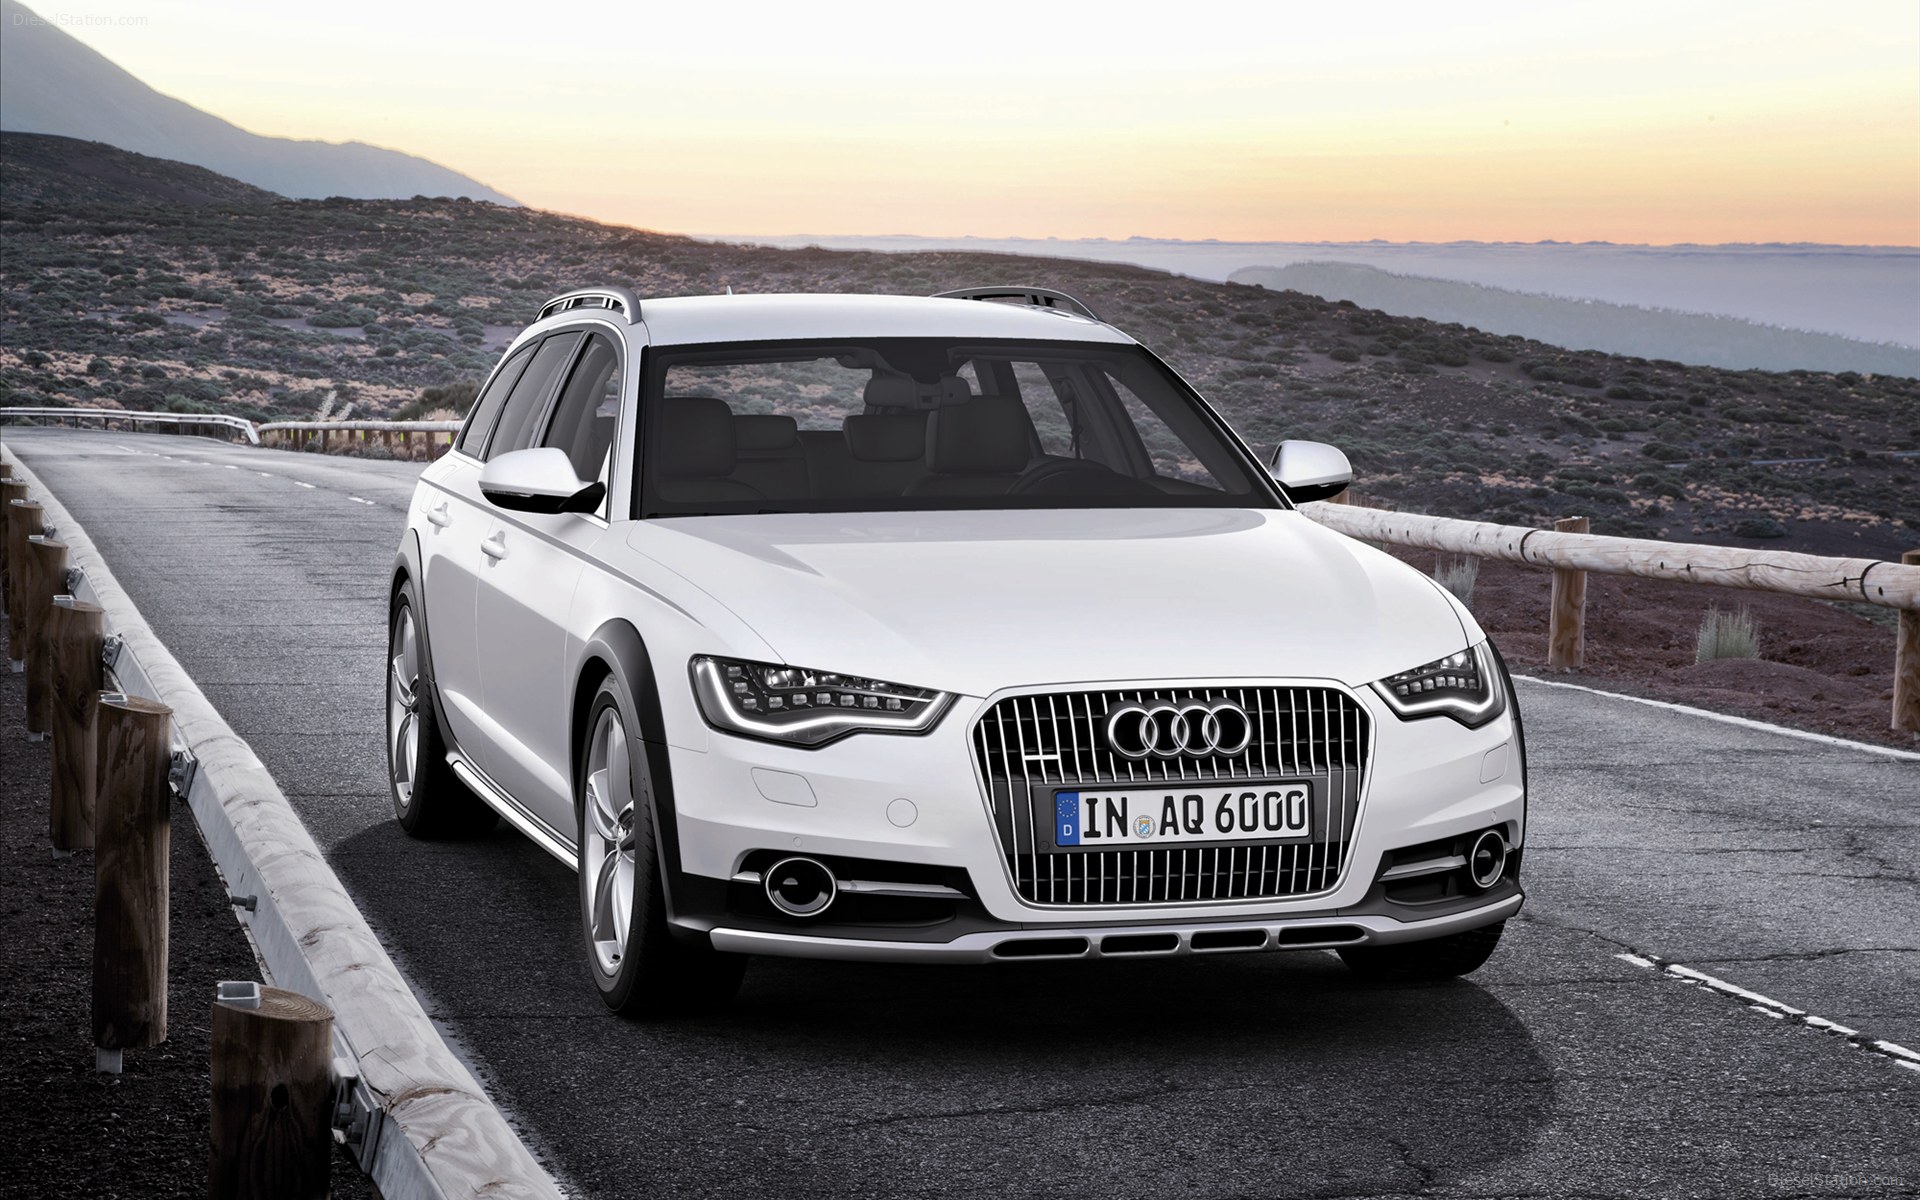 New Audi A6 Wallpaper Full HD Pictures